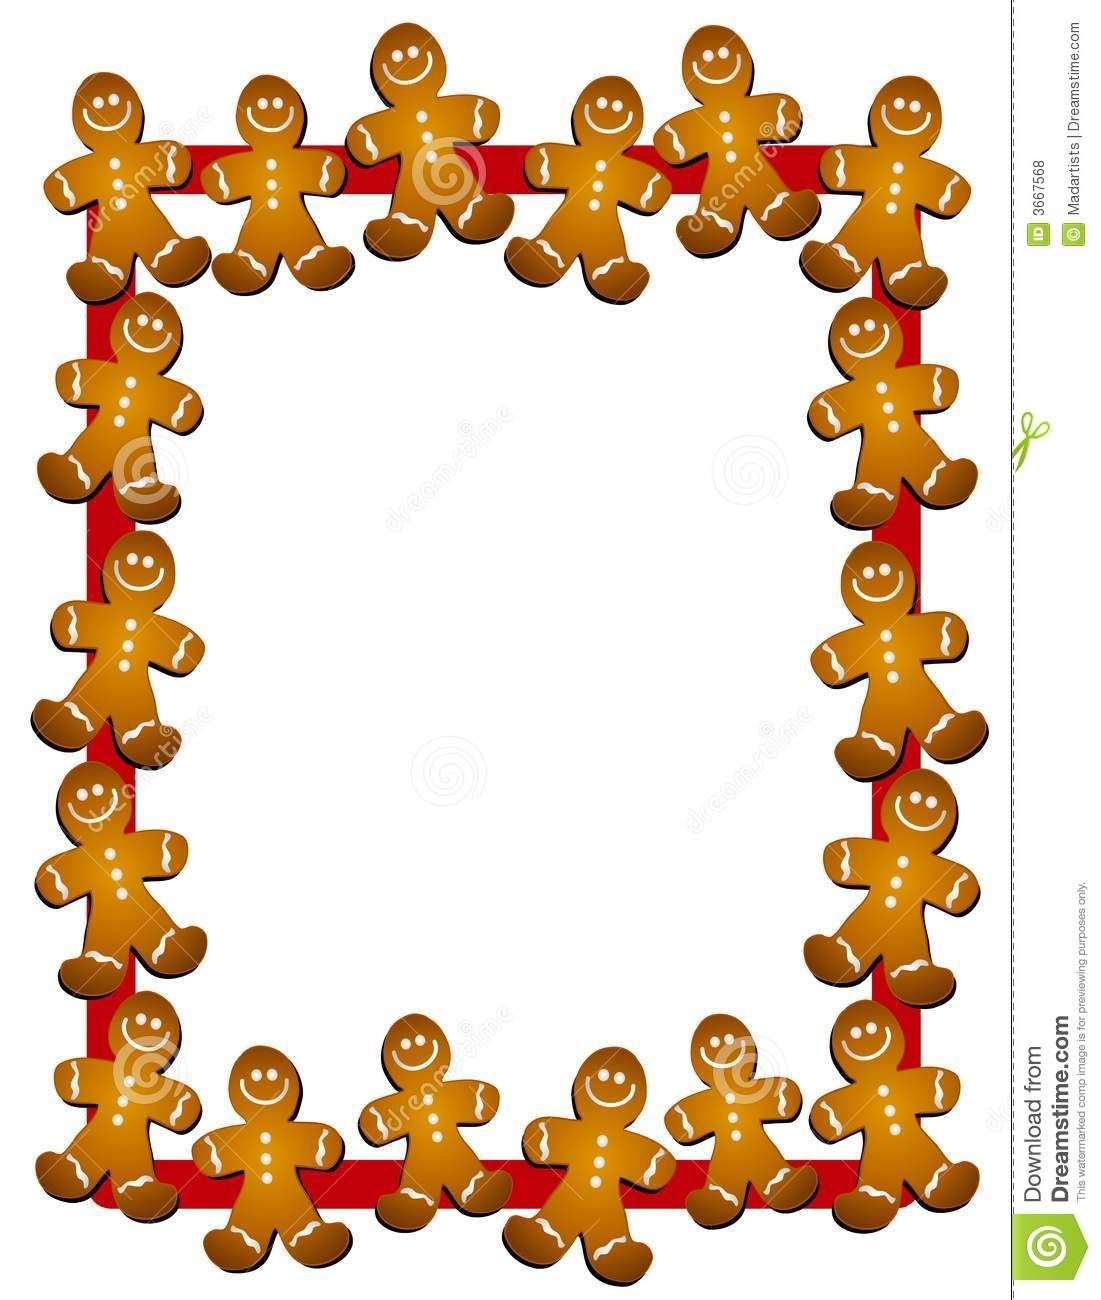 Gingerbread christmas clipart.